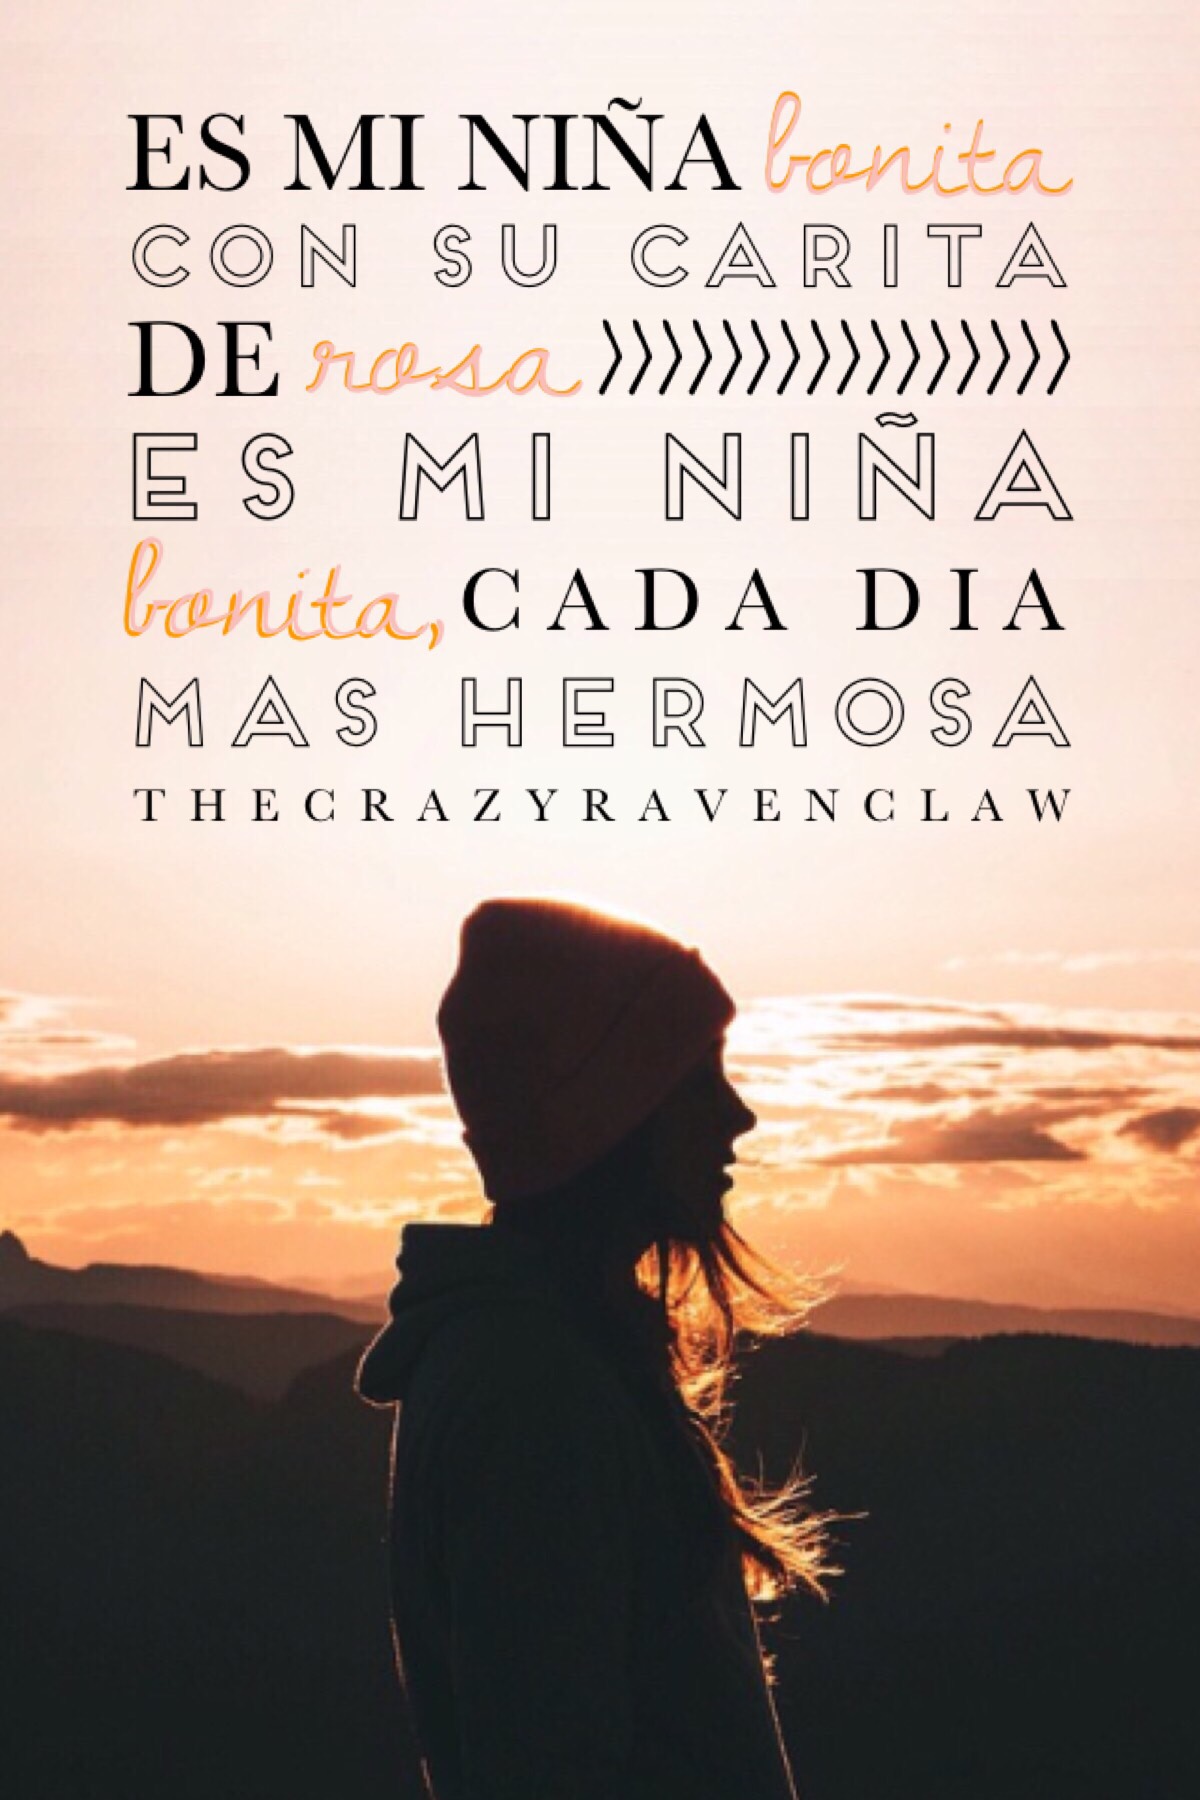 My grandma used to sing me this song when I was younger... augh nostalgia 😭 it’s in Spanish, so... you can put into google translate if your really interested in what it says 😂

QOTD in comments!
